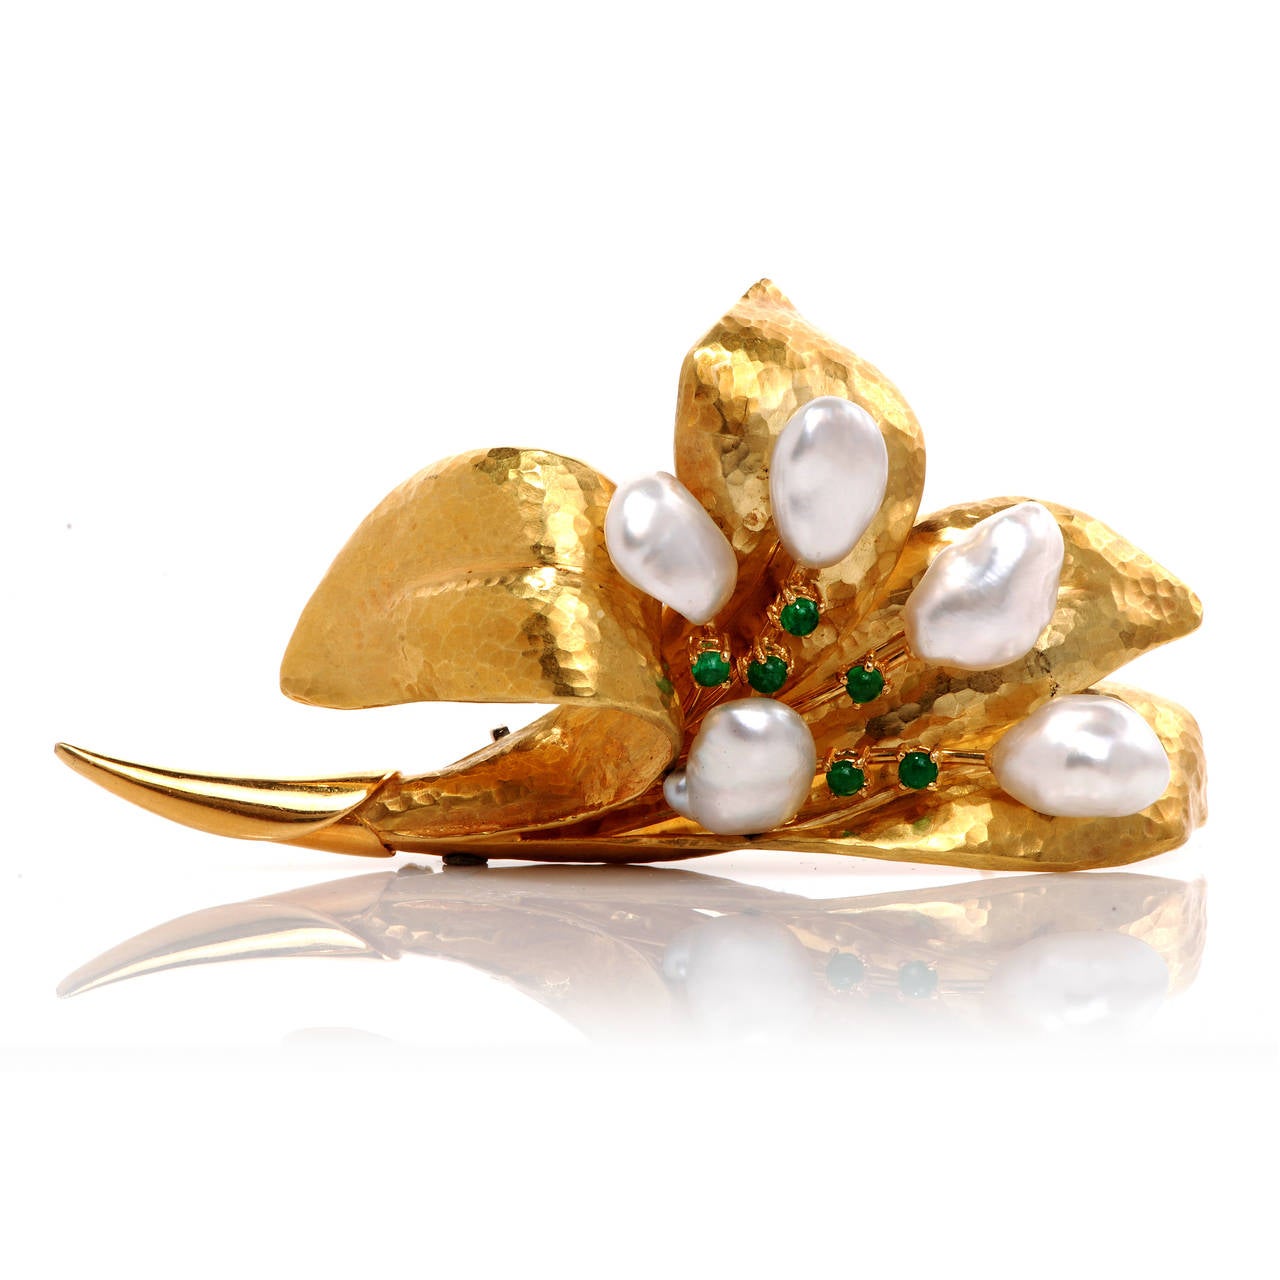 This magnificent floral pin is handcrafted in solid 18K yellow gold hand- hammered finish. This pin exposes a lovely Lily flower with 5 natural lustrous pearls and centered with 6 genuine cabochon emeralds approx 0.75cttw, prong set. This item is in